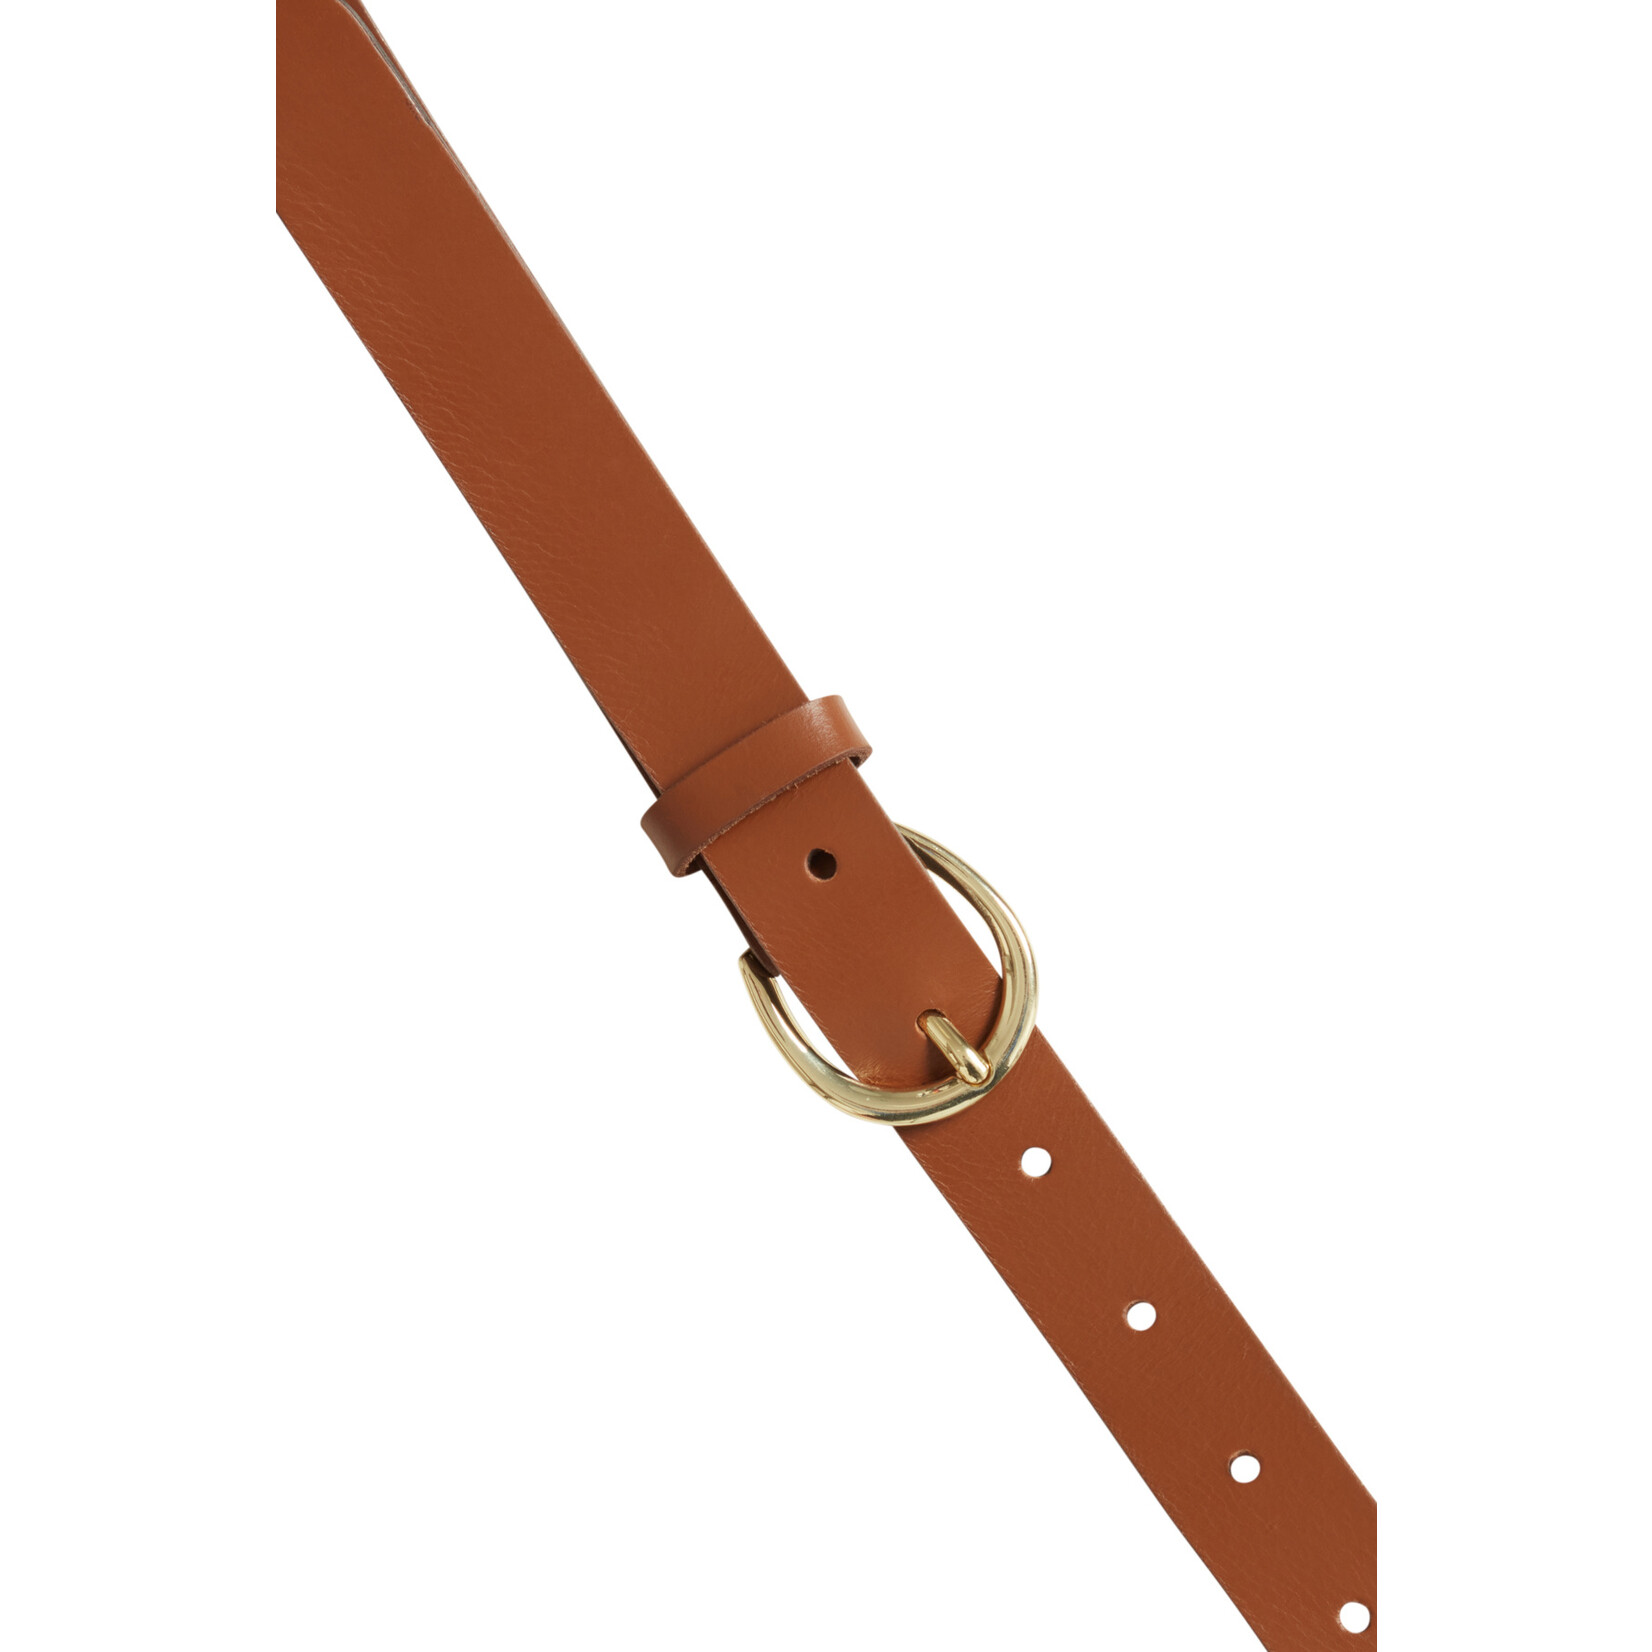 B. Young Vicky Leather Belt - Cognac